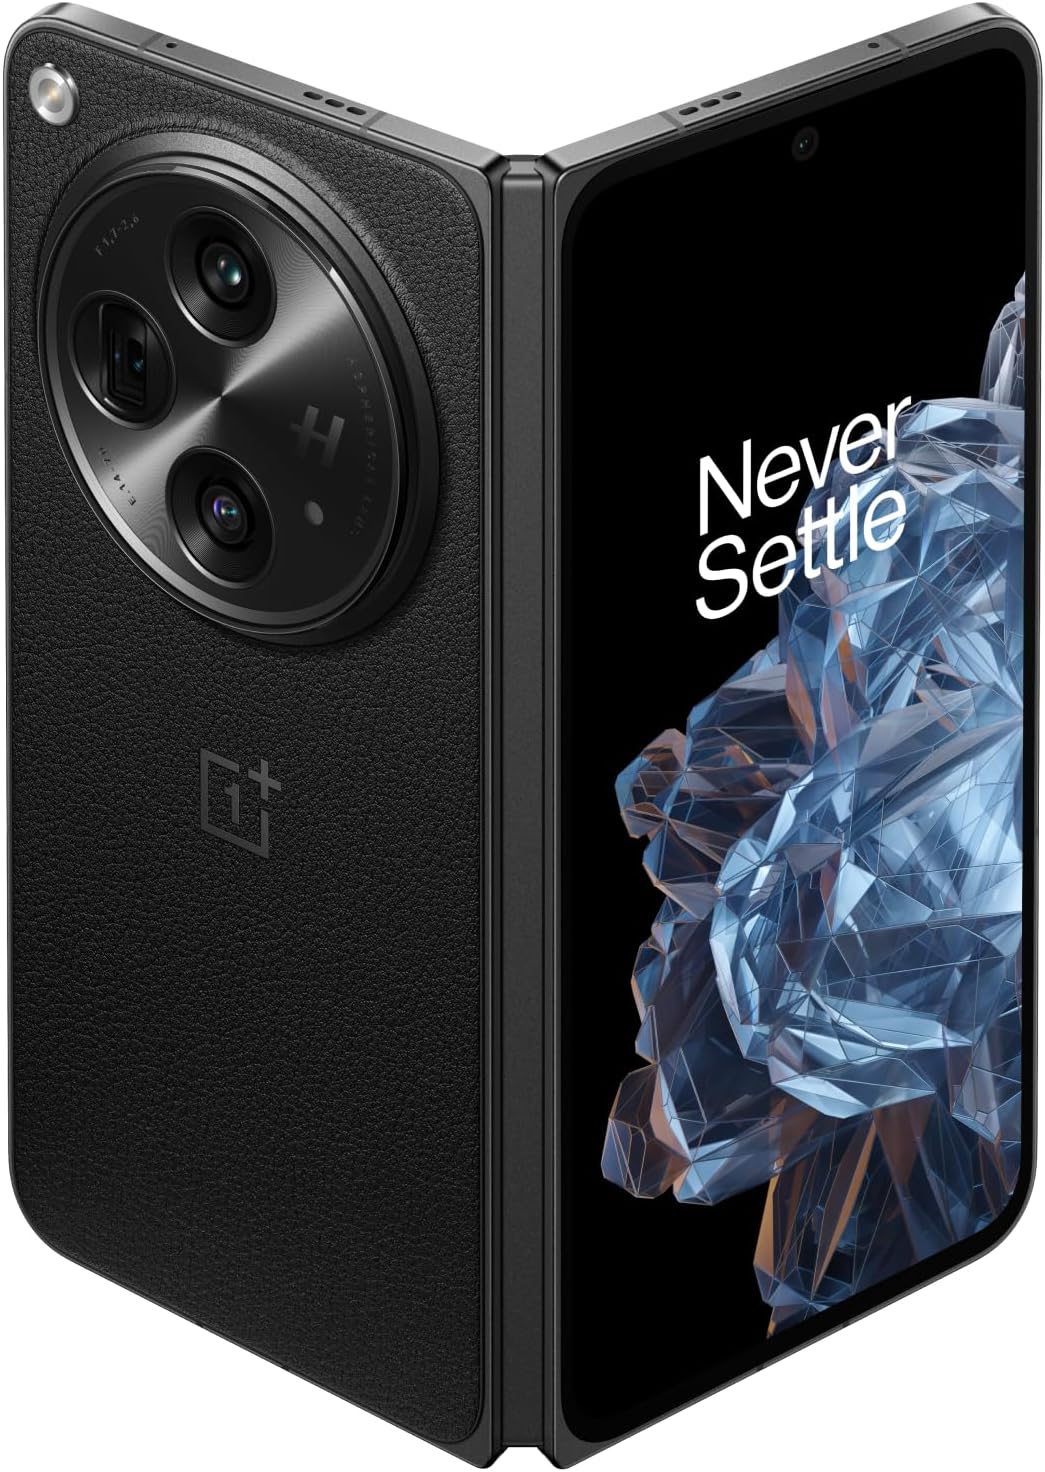 ONEPLUS Open, 16GB RAM+512GB, Dual-SIM, Voyager Black, Factory Unlocked Android Smartphone, 4805 mAh Battery, 67W Fast Charging, Hasselblad Camera, 120Hz Fluid Display